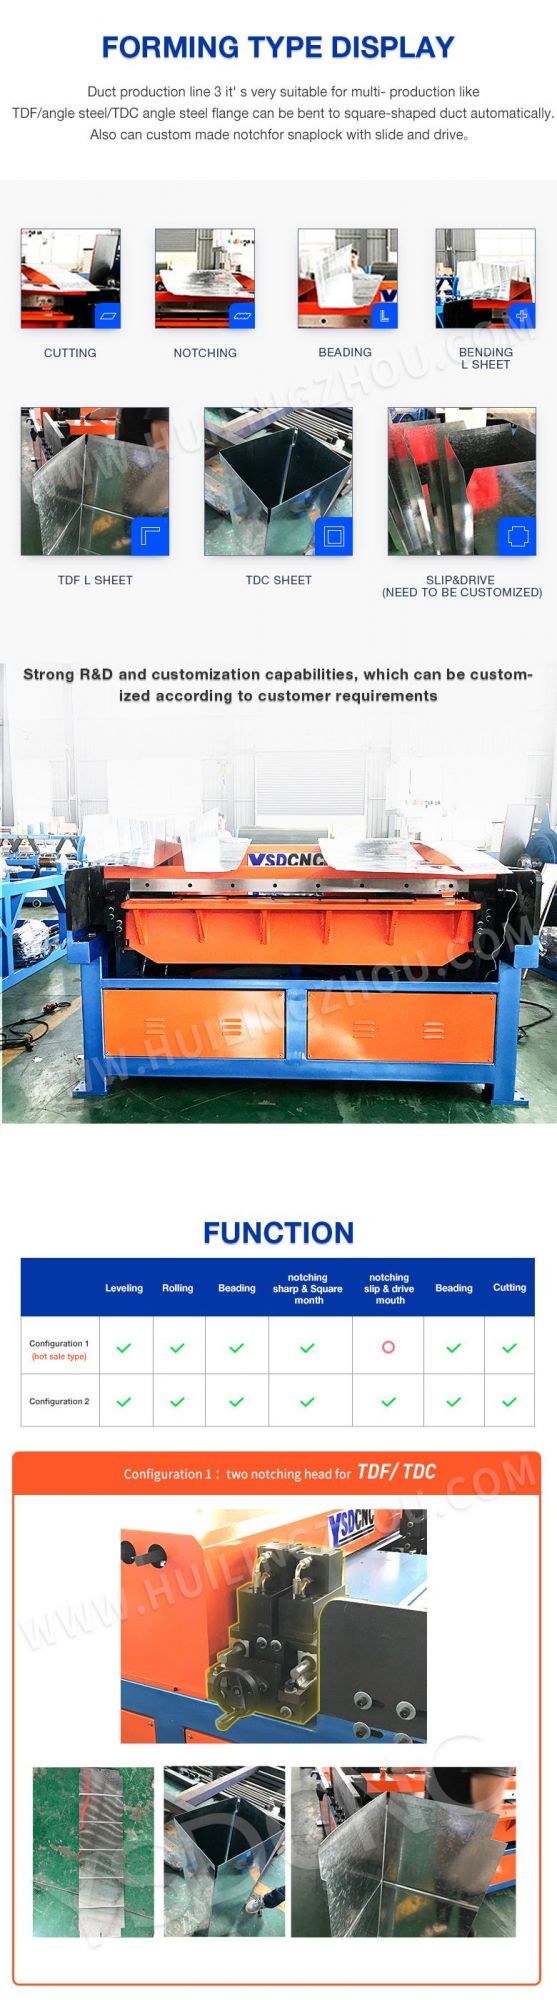 Ysdcnc Production Line 3 Forming Machine Flexible Duct Manufacturing Machines with Good Quality